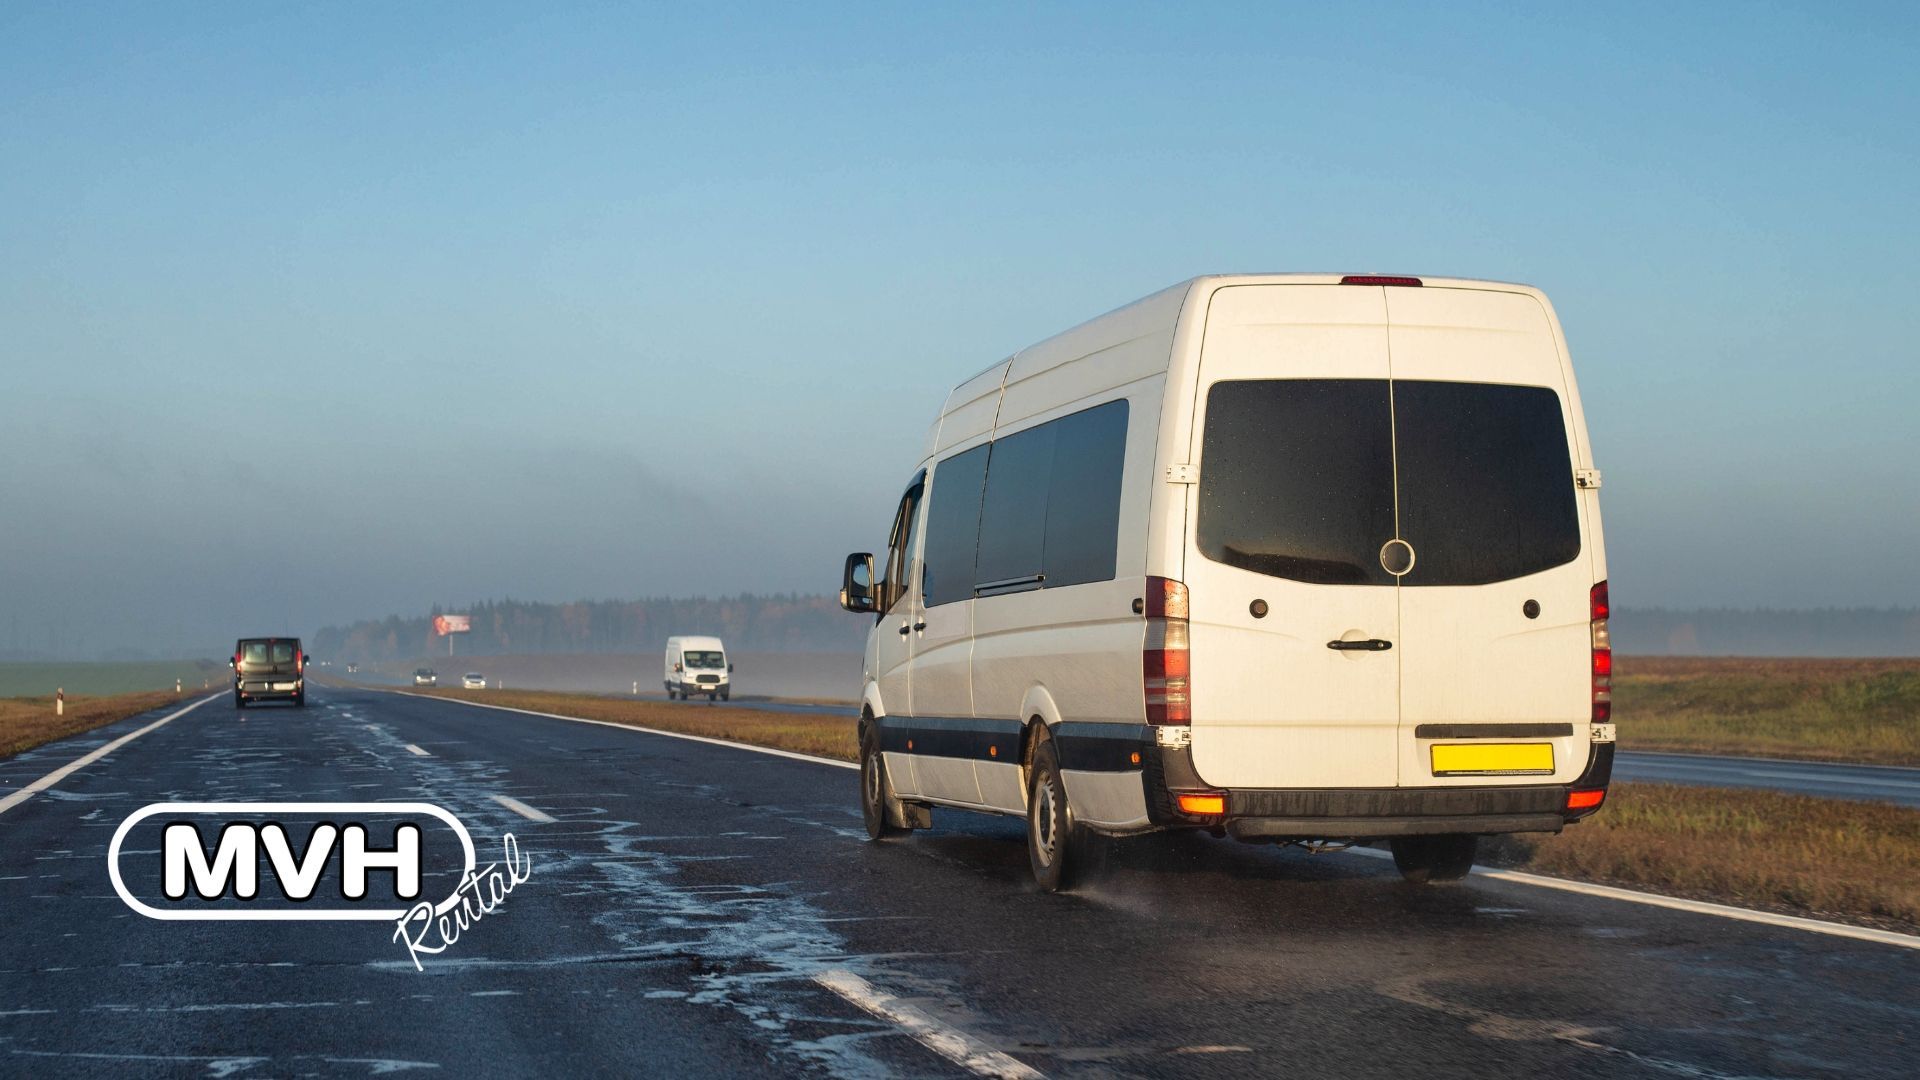 So, you're planning to hire a minibus for a day trip. What should you do to make the adventure as smooth and enjoyable as possible? Find out in our guide.